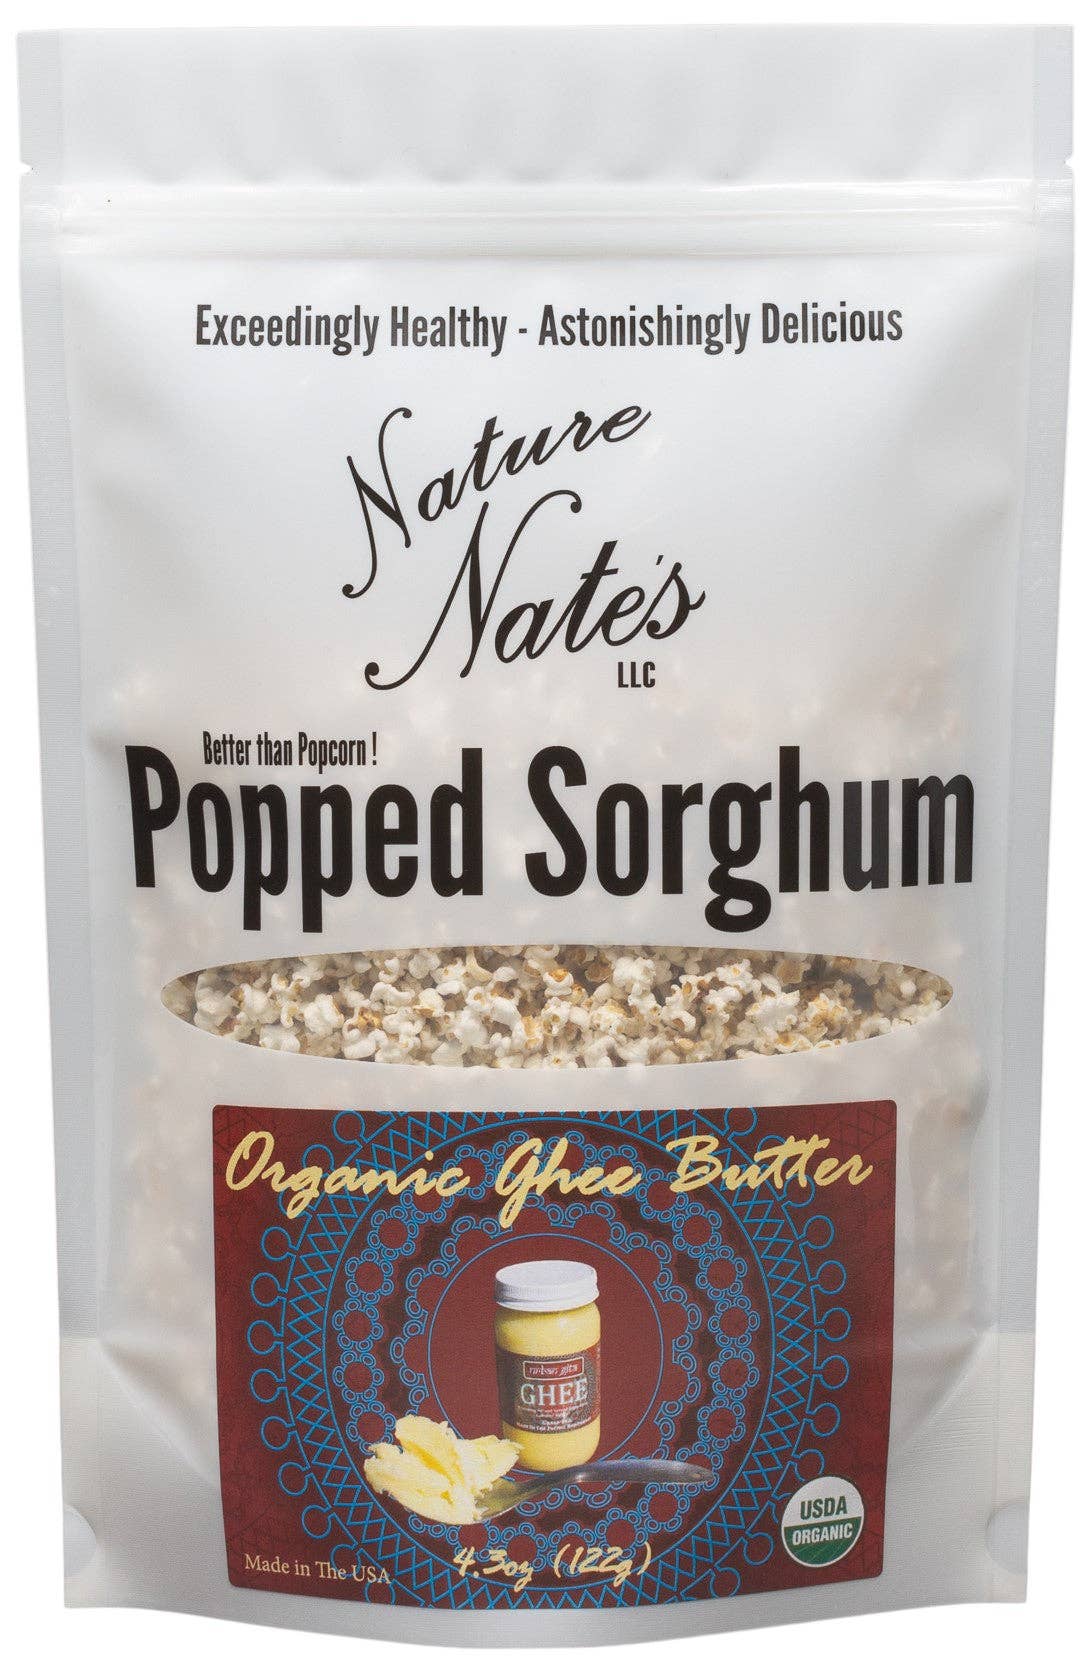 Organic Popped Sorghum with Ghee Butter 4.3 OZ